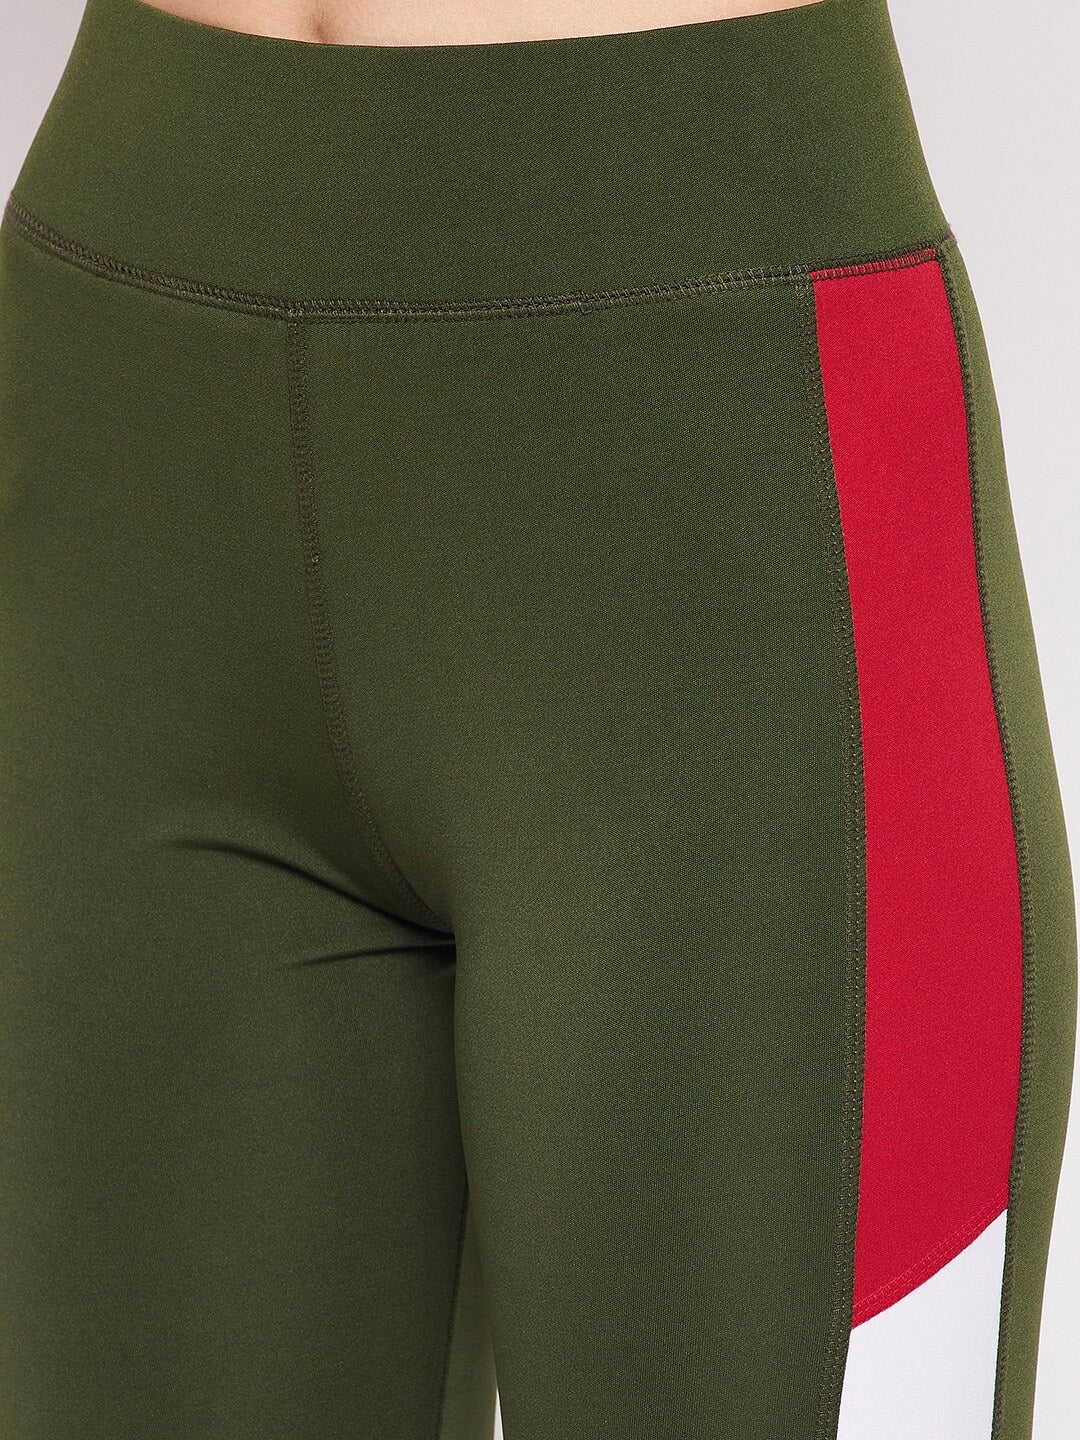 Women Olive Green Colorblocked Tights